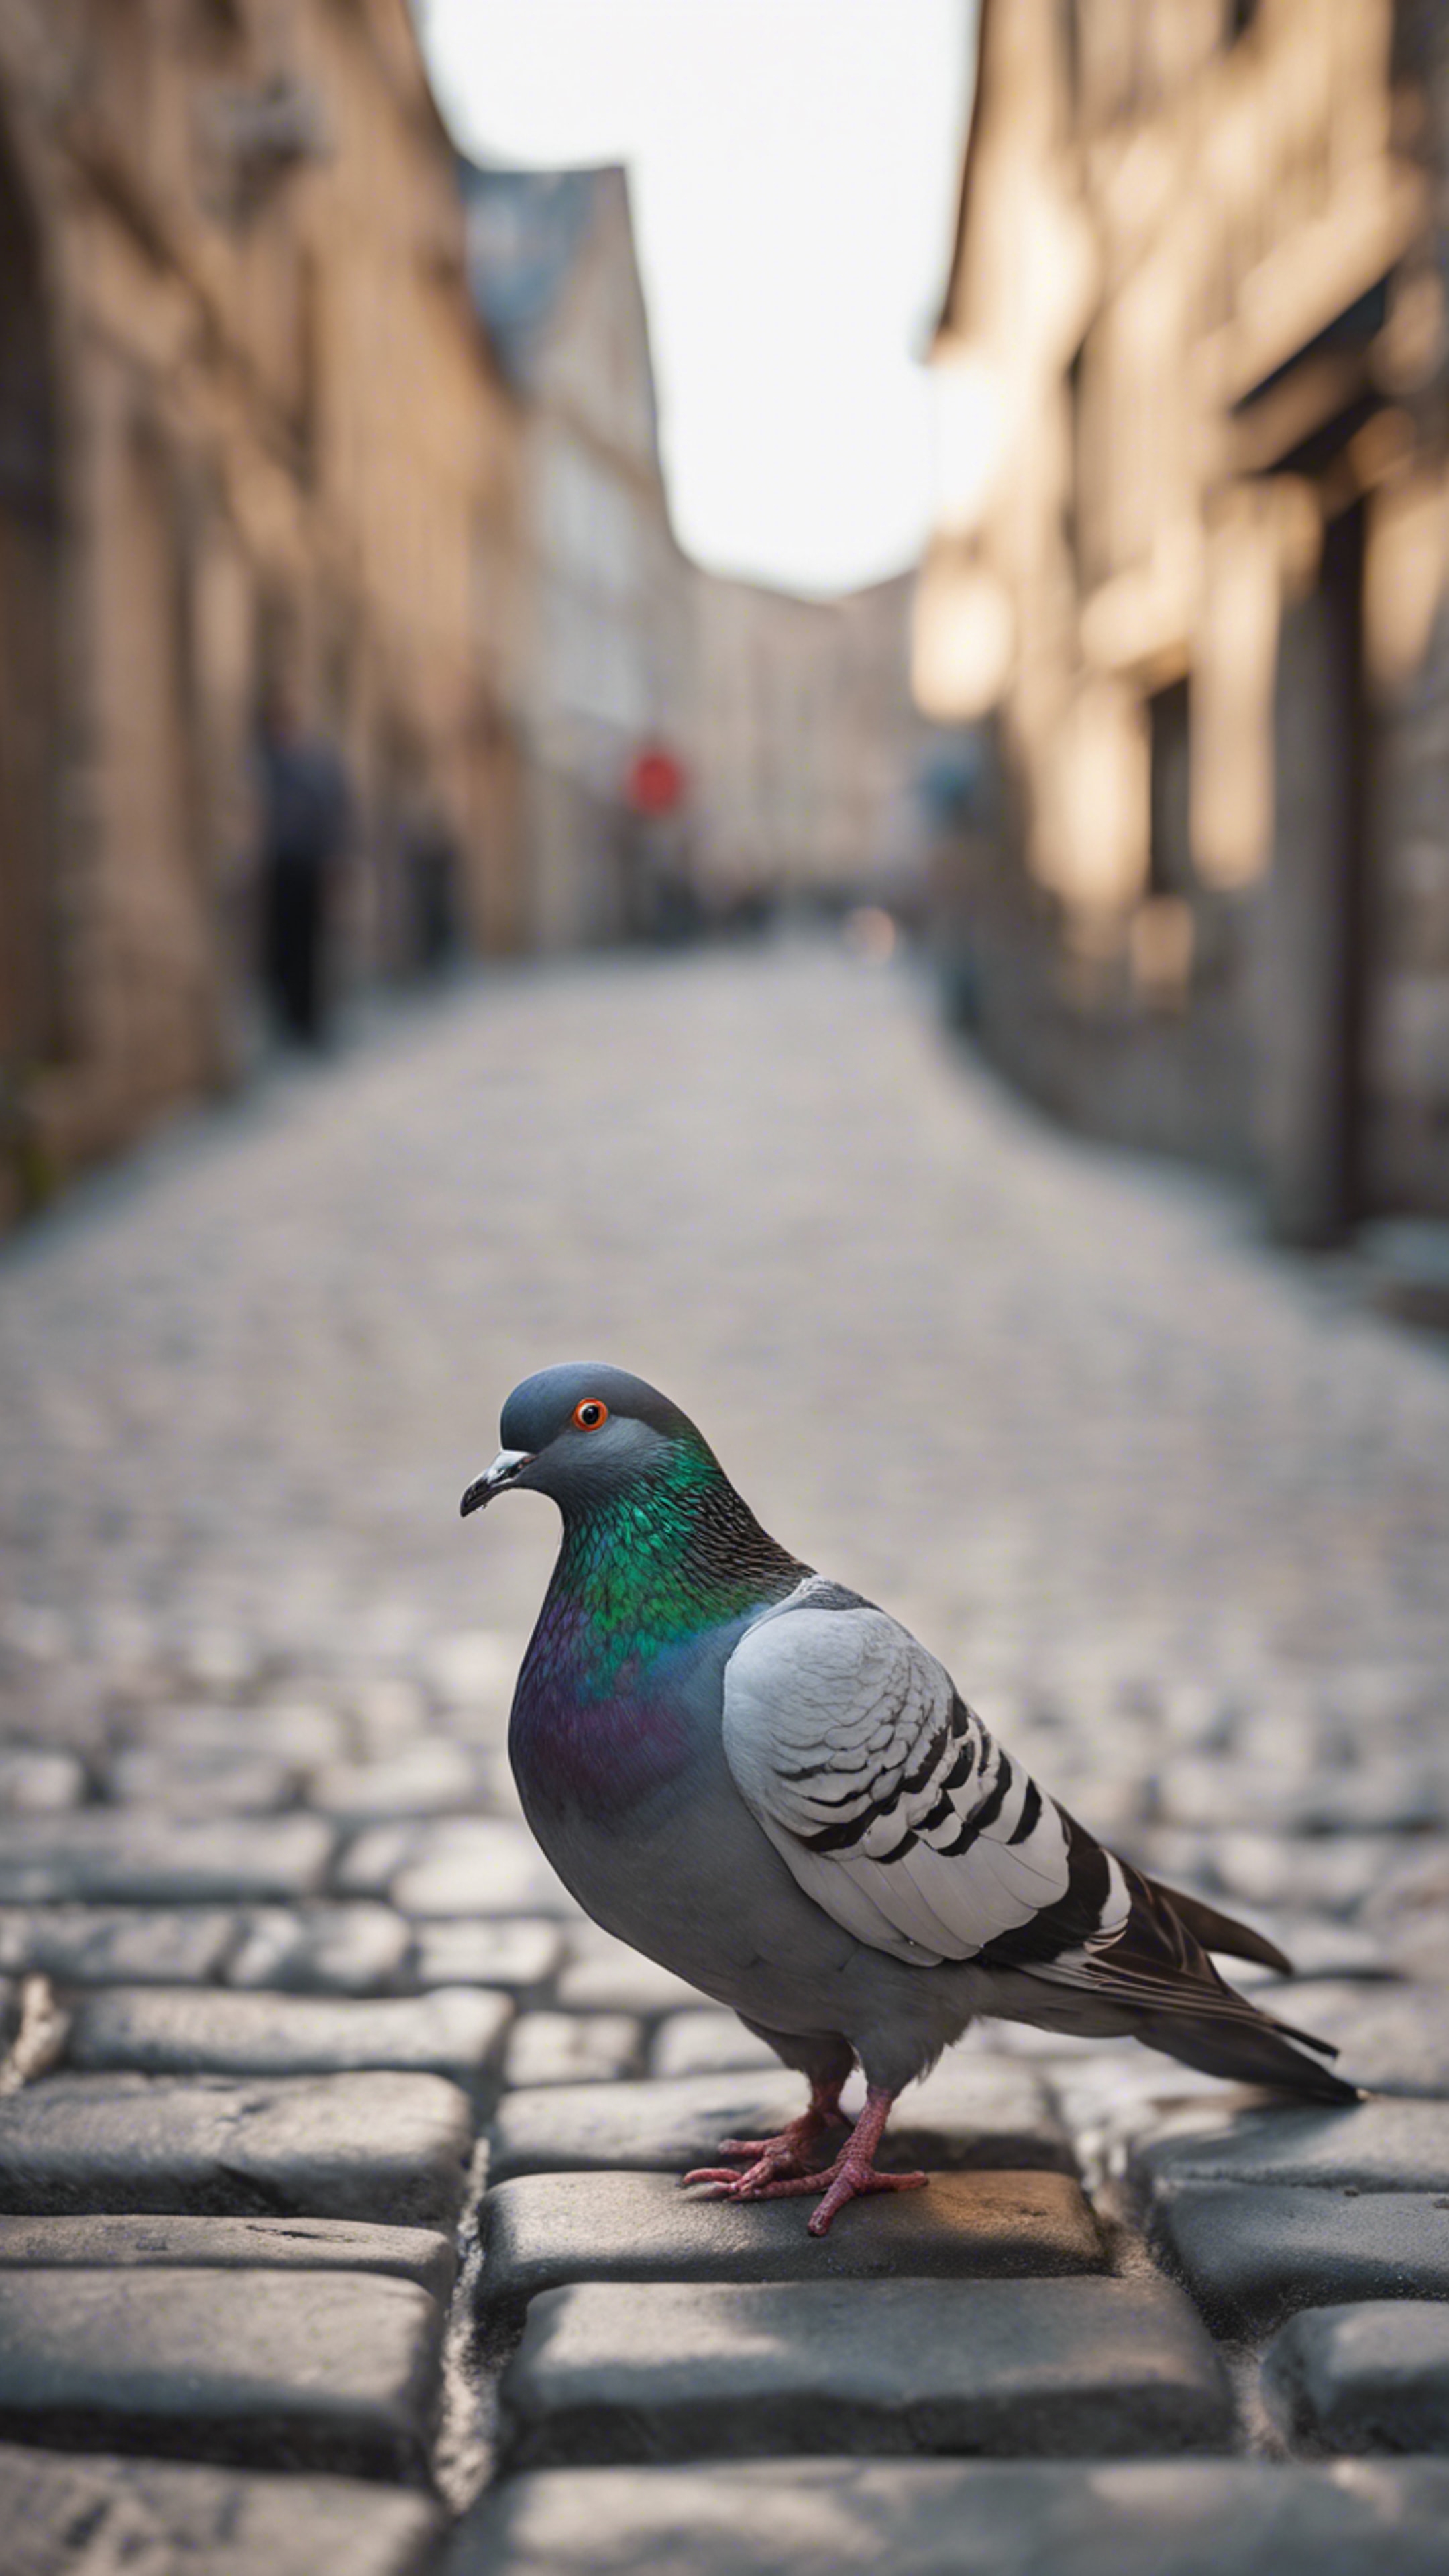 A pigeon standing on cobblestone street in the middle of an old city, its beautiful light gray plumage glistening.壁紙[03a93bb4226c4140ad33]